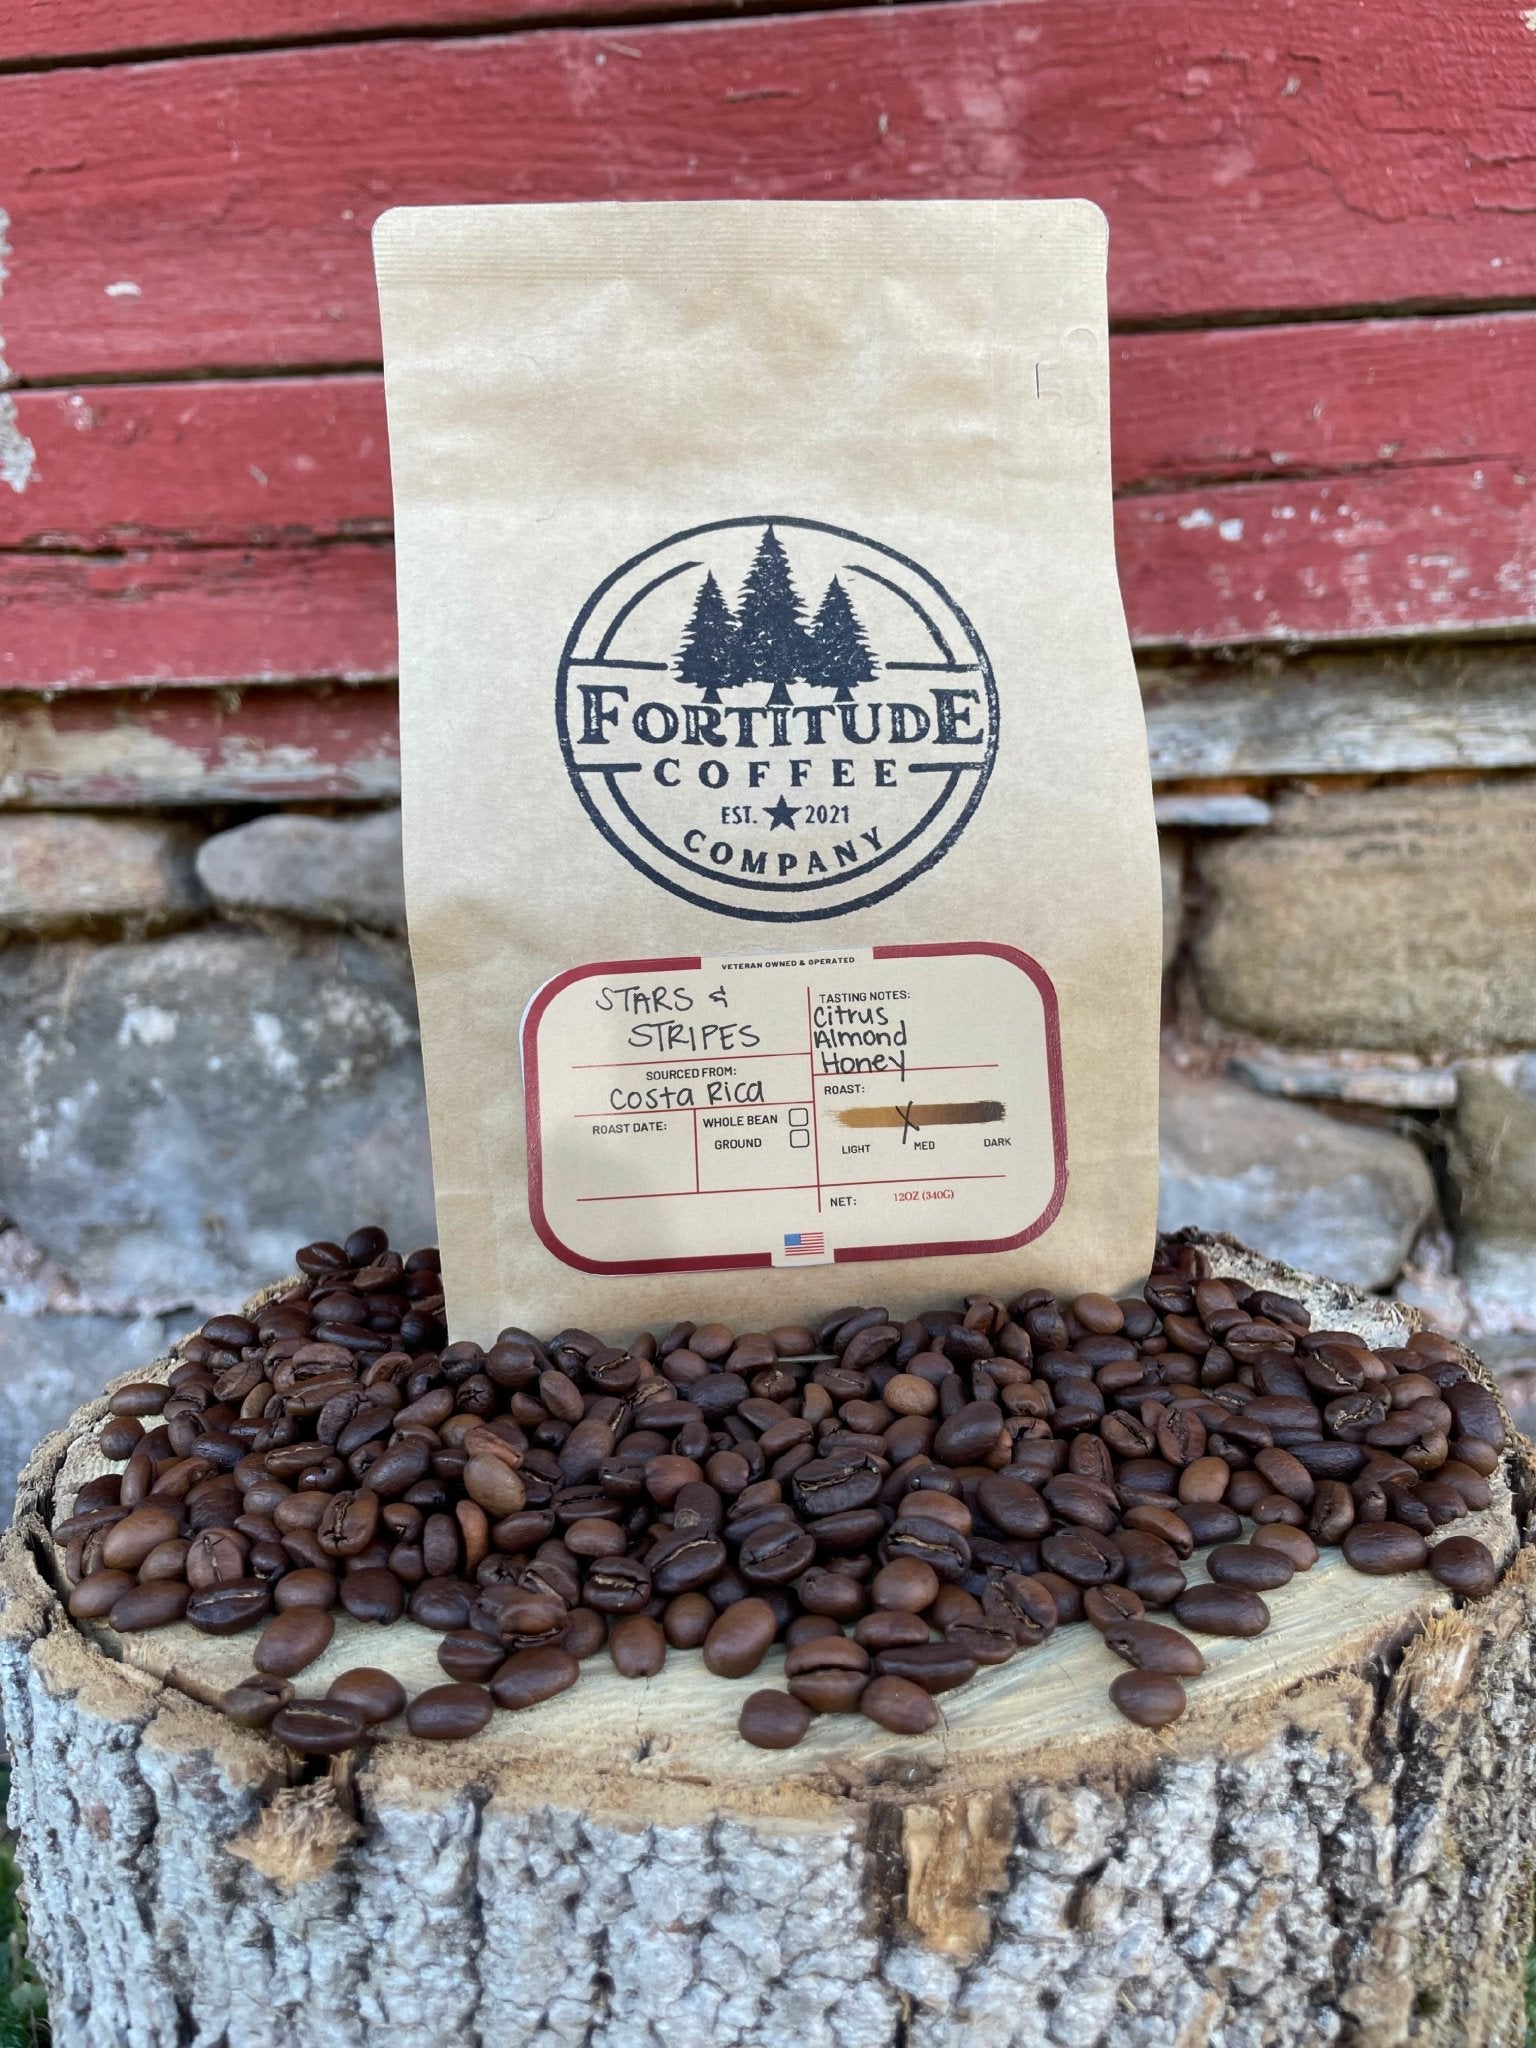 STARS & STRIPES - Fortitude Coffee Co